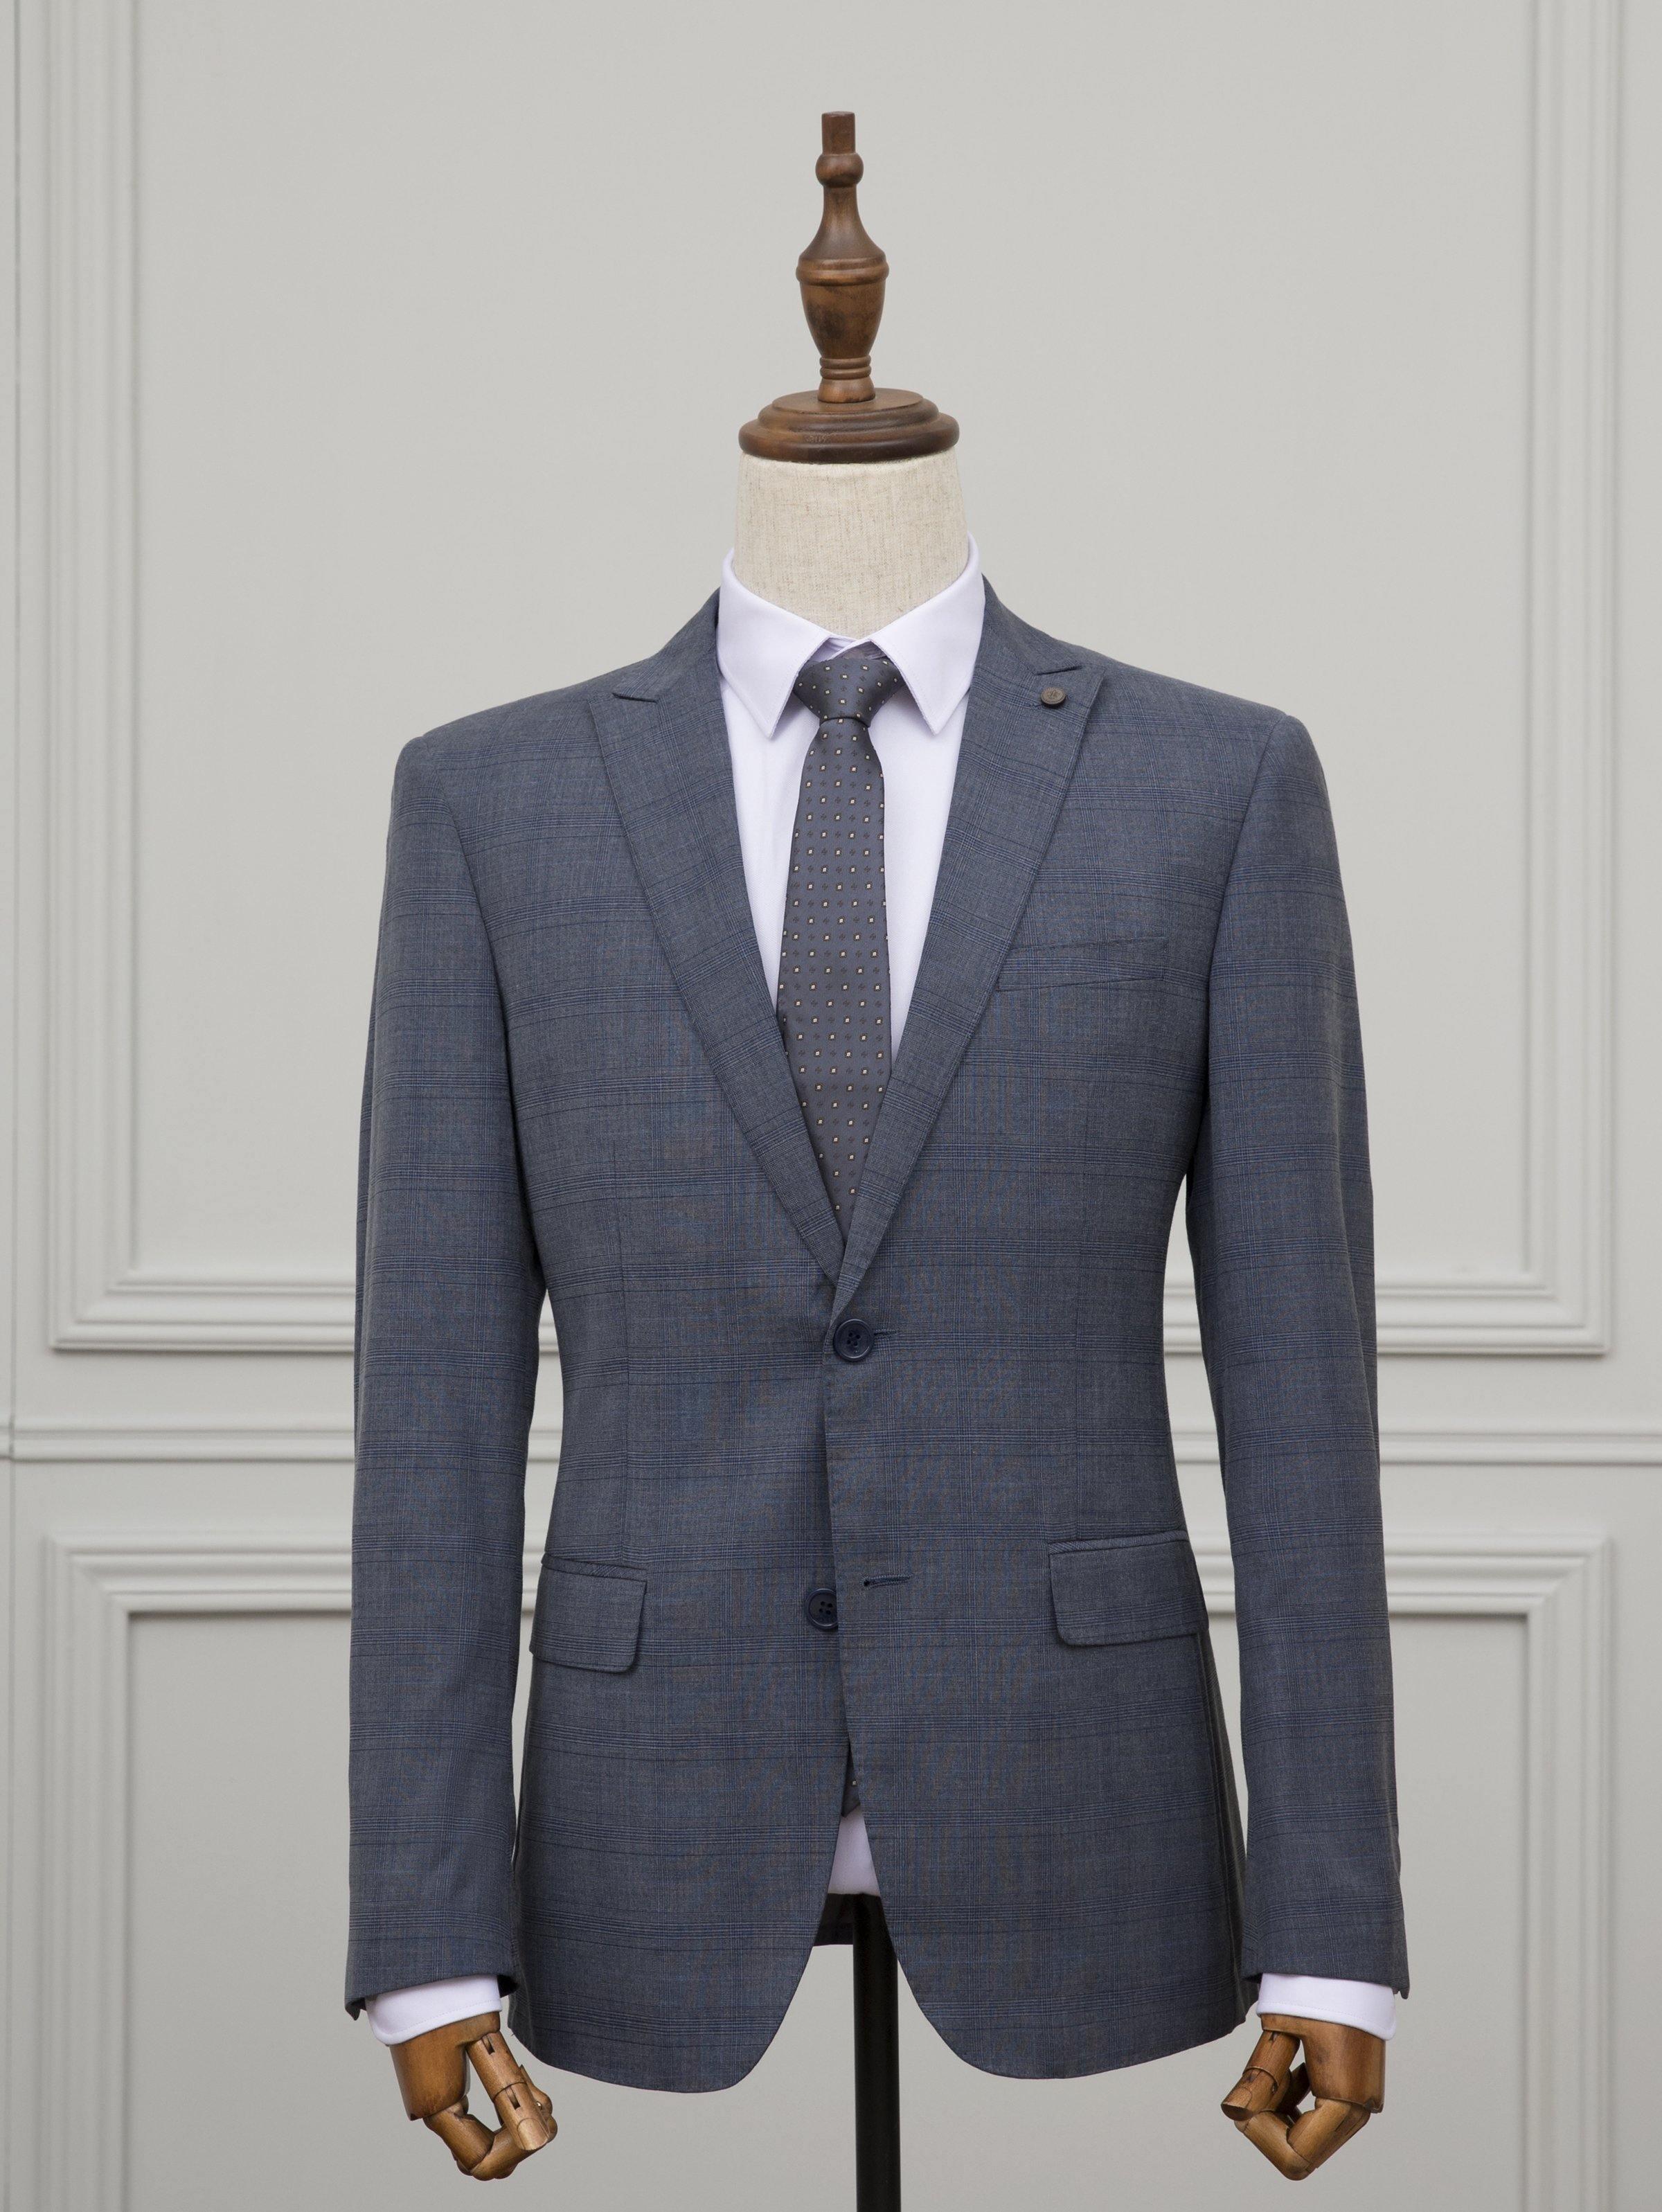 CHECK SUIT 2 BUTTON BLUE GREY at Charcoal Clothing